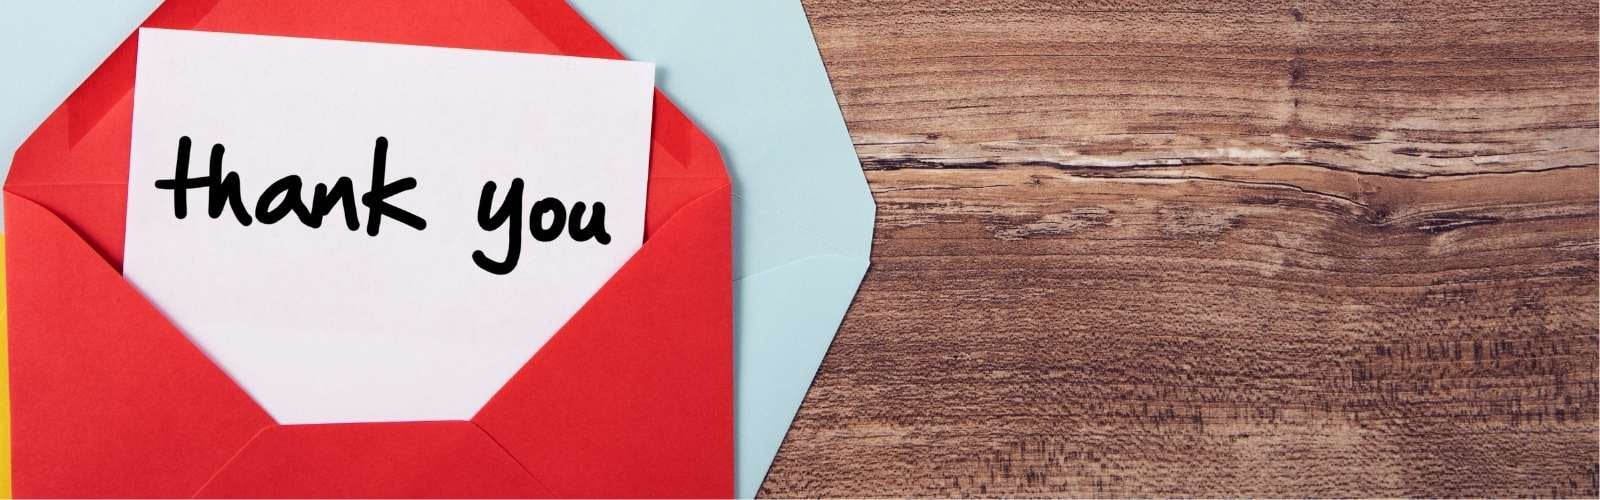 hand written thank you in a red envelope on a wood background